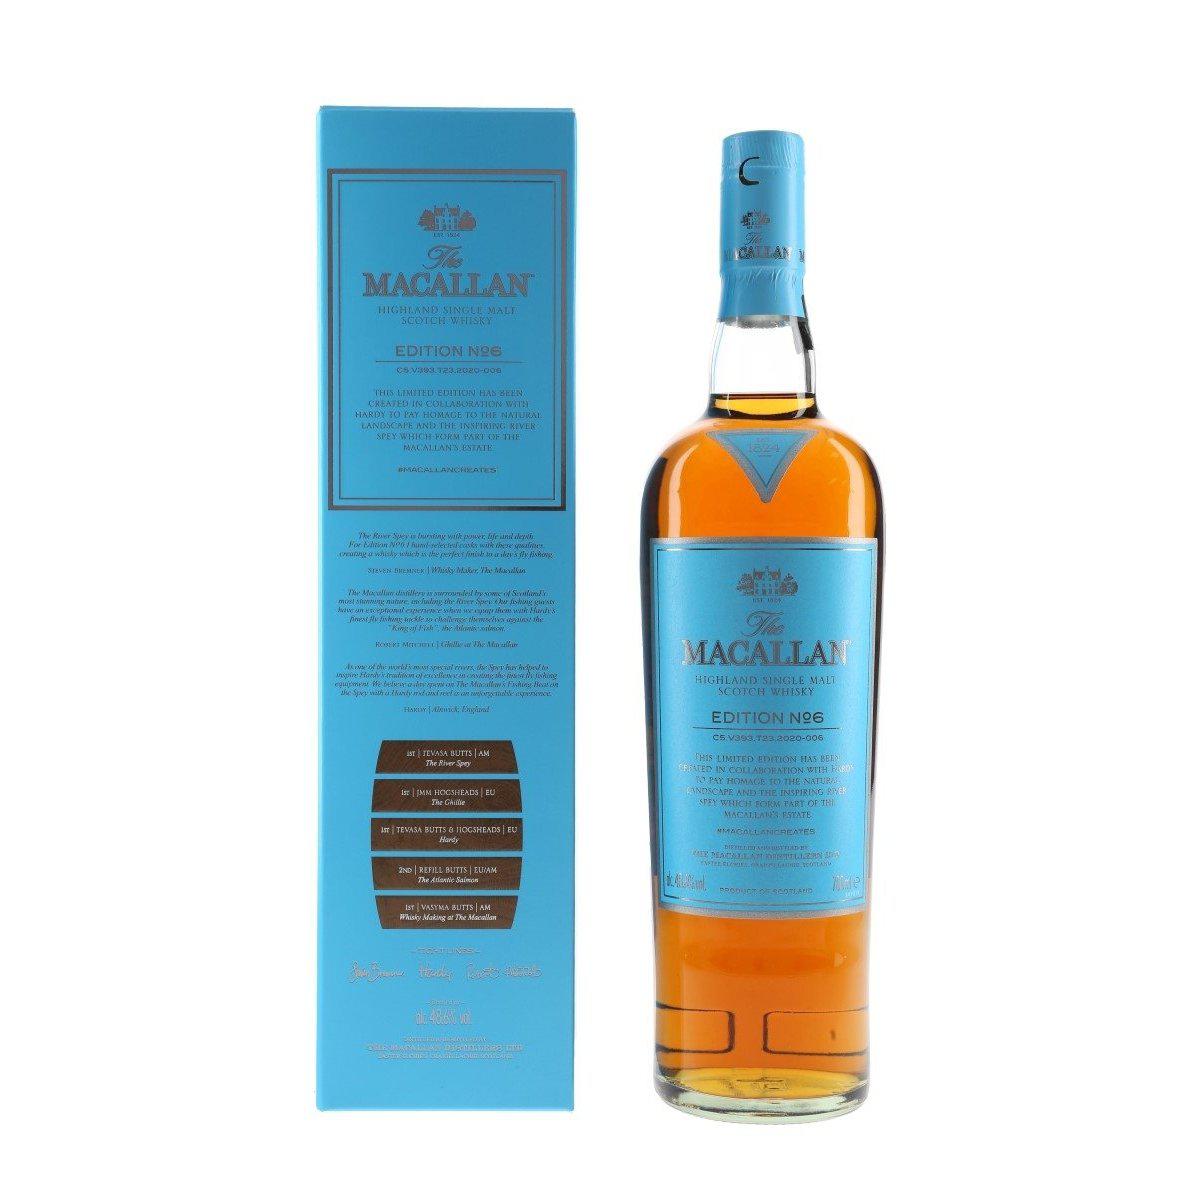 The Macallan Edition 6 Limited Edition Scotch Whisky 700ml